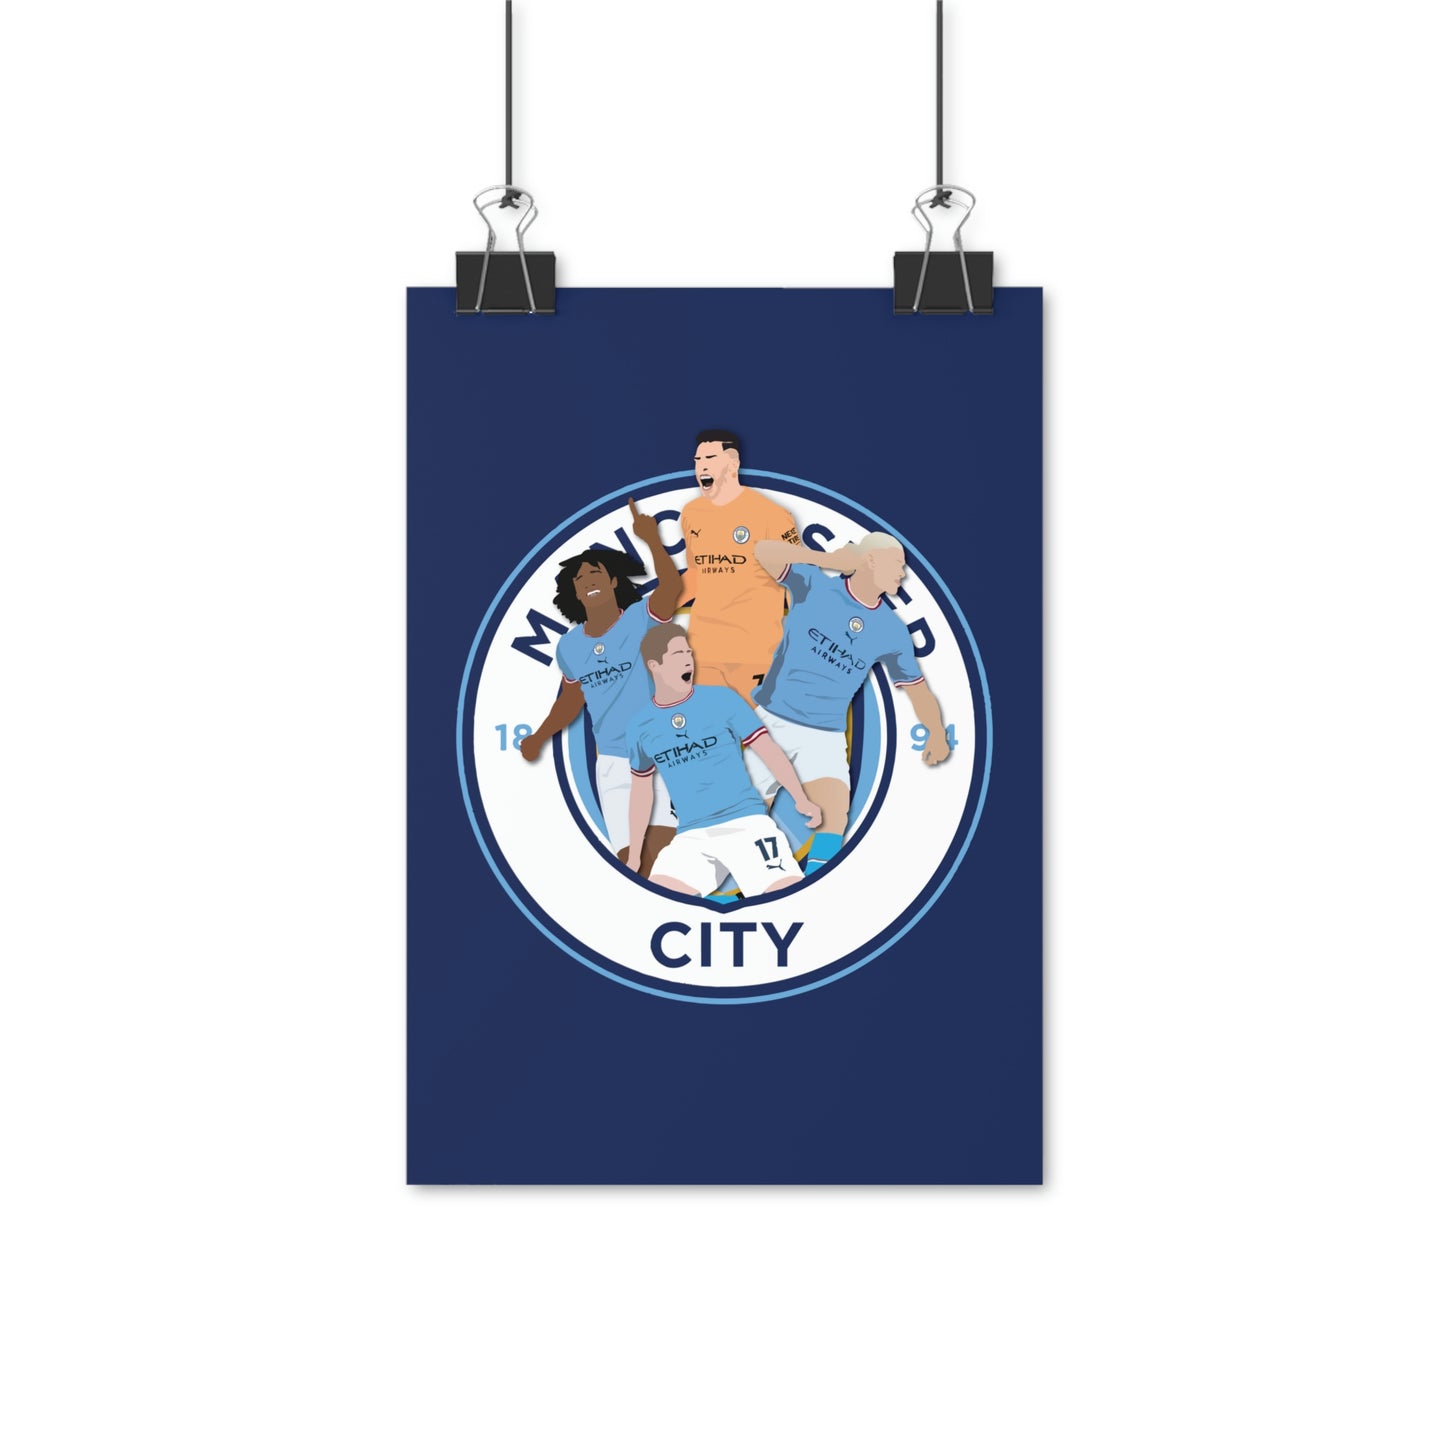 Manchester City poster with players Ederson, Ake, Haaland and De Bruyne (Blue background)